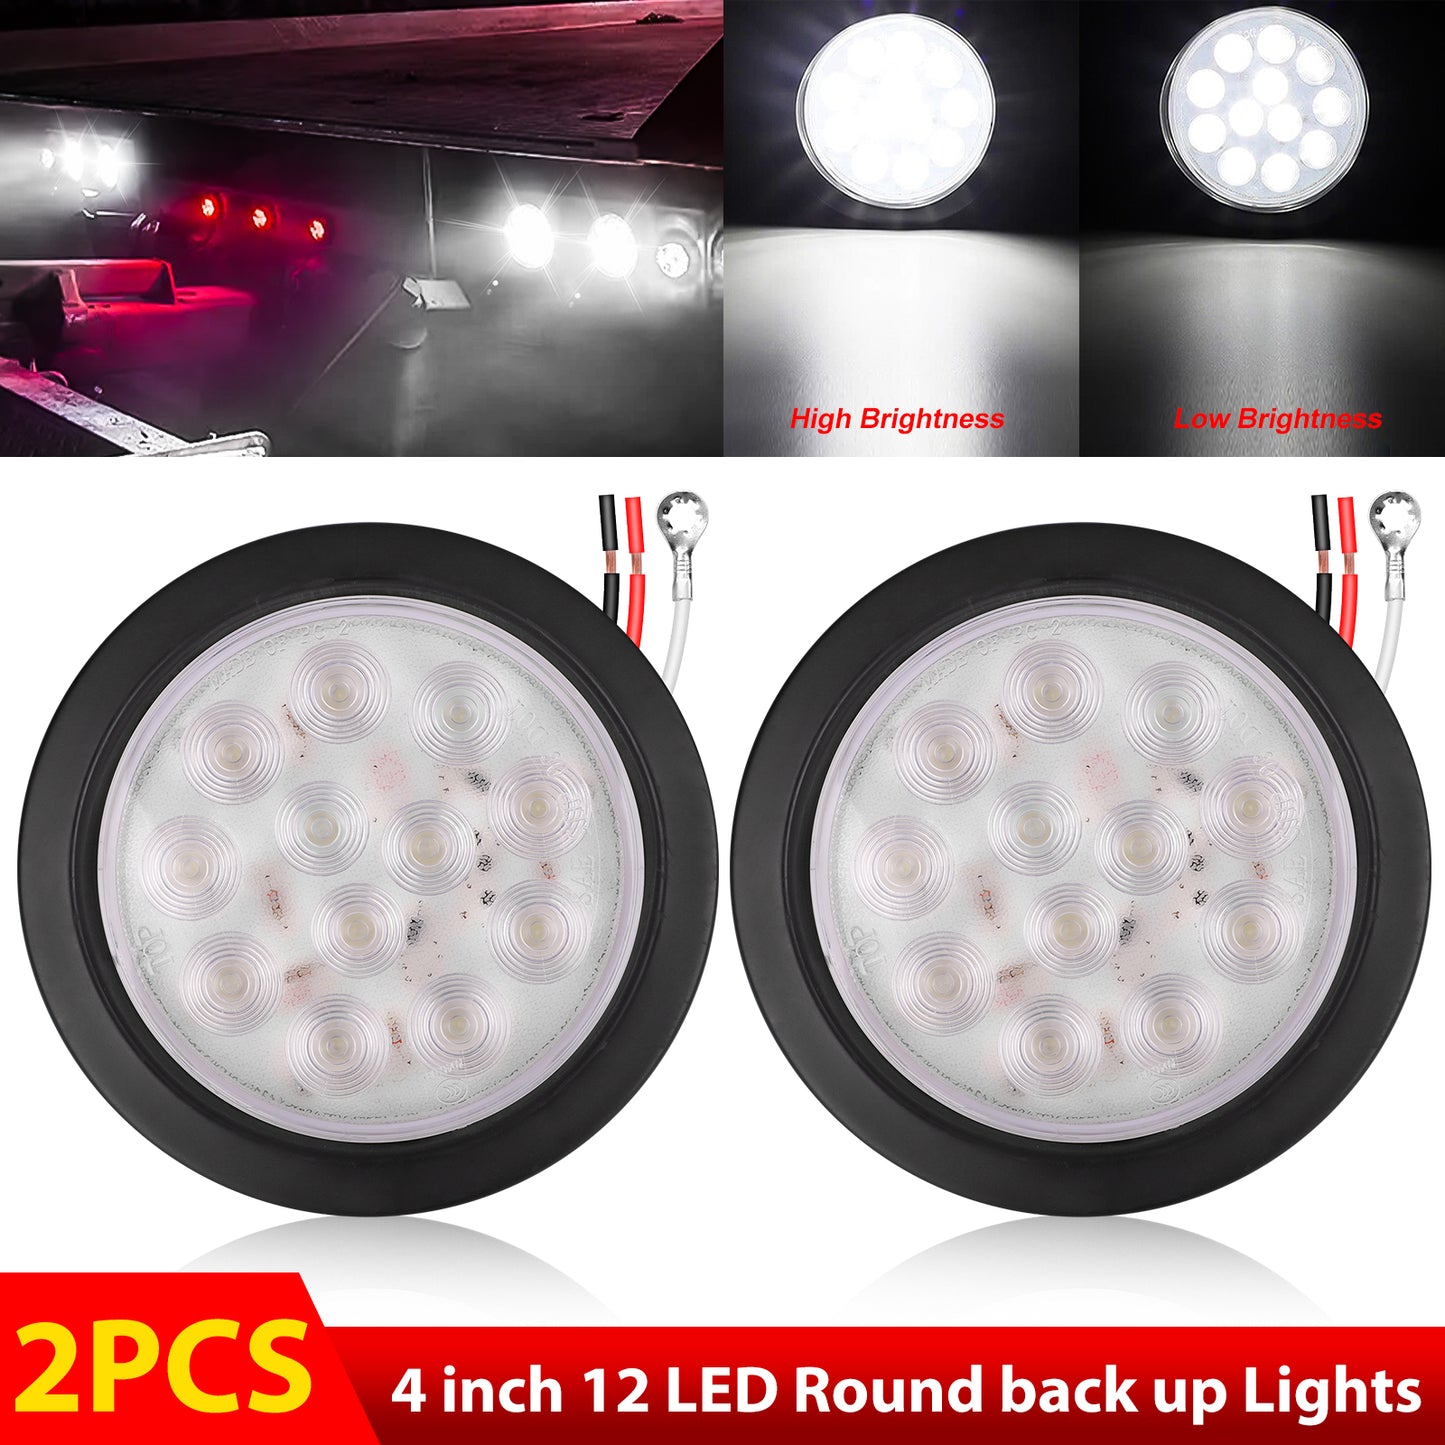 2pcs 4 Inch Round 24 LED Reverse Backup Tail Lights- Waterproof Seal, Easy Installation - Compatible with Trucks, Trailers, Heavy-Duty Vehicles like Peterbilt and Kenworth